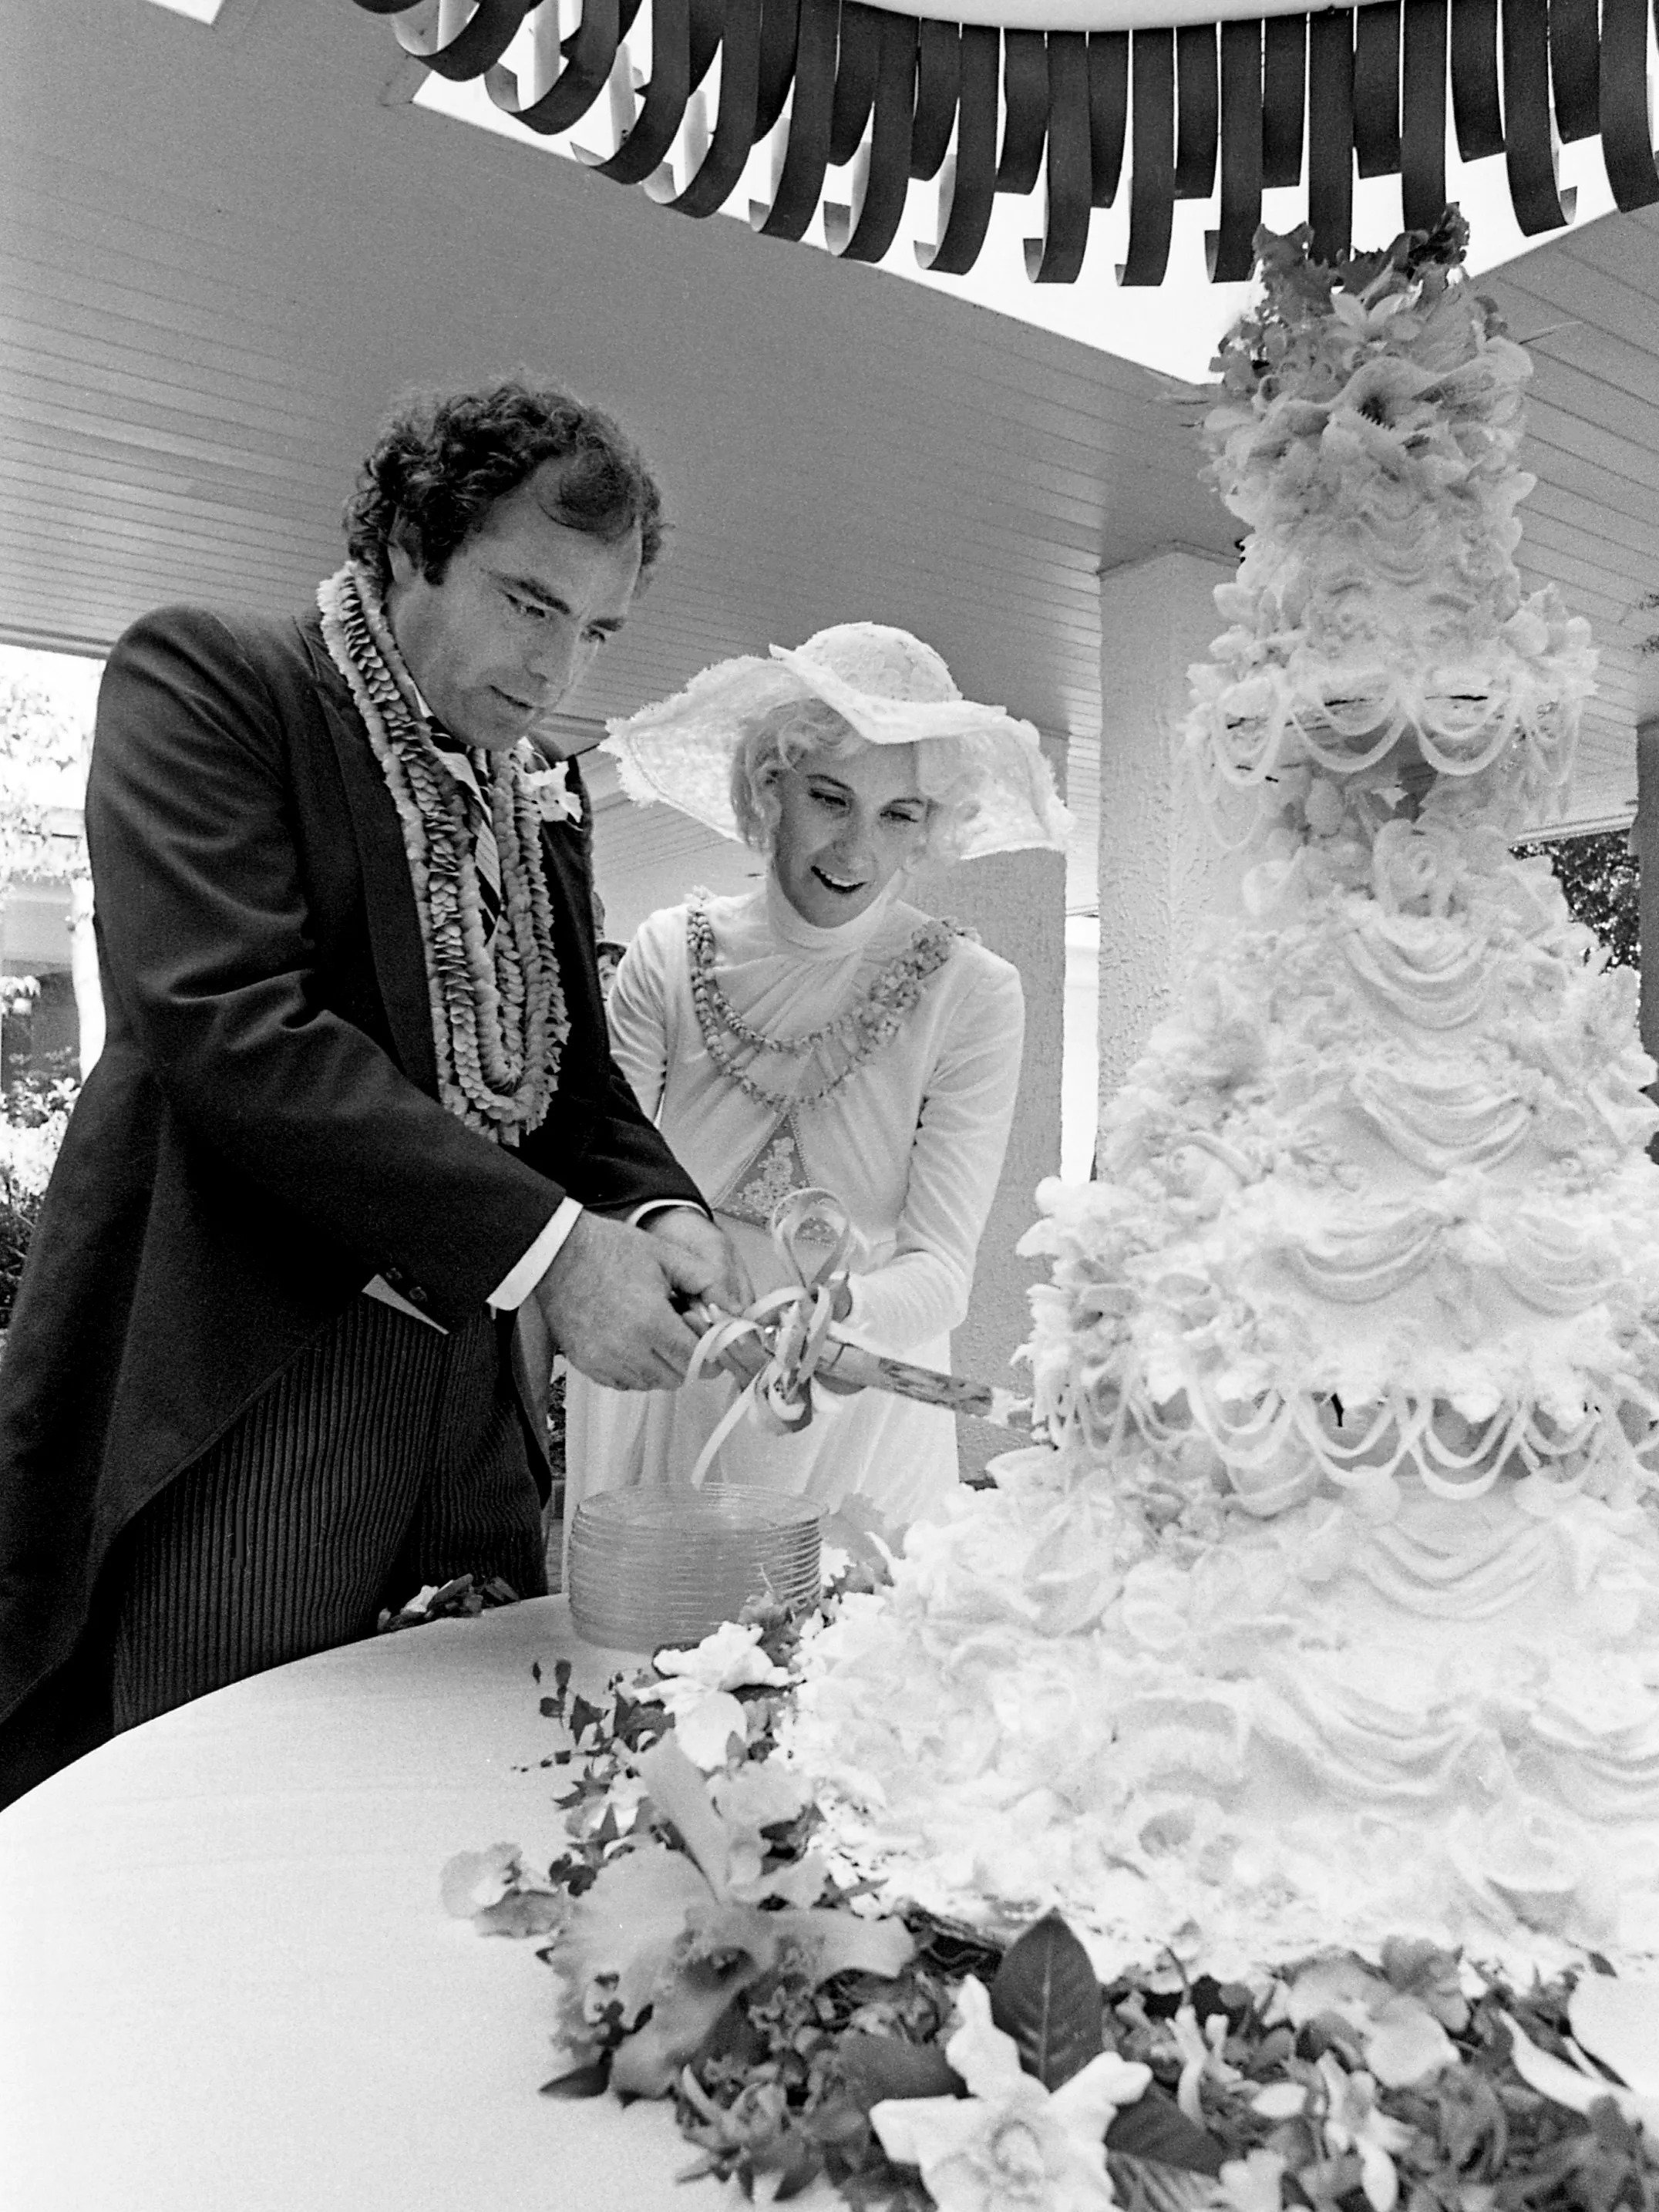 Michael Tomlin and Tammy cutting the cake at their wedding